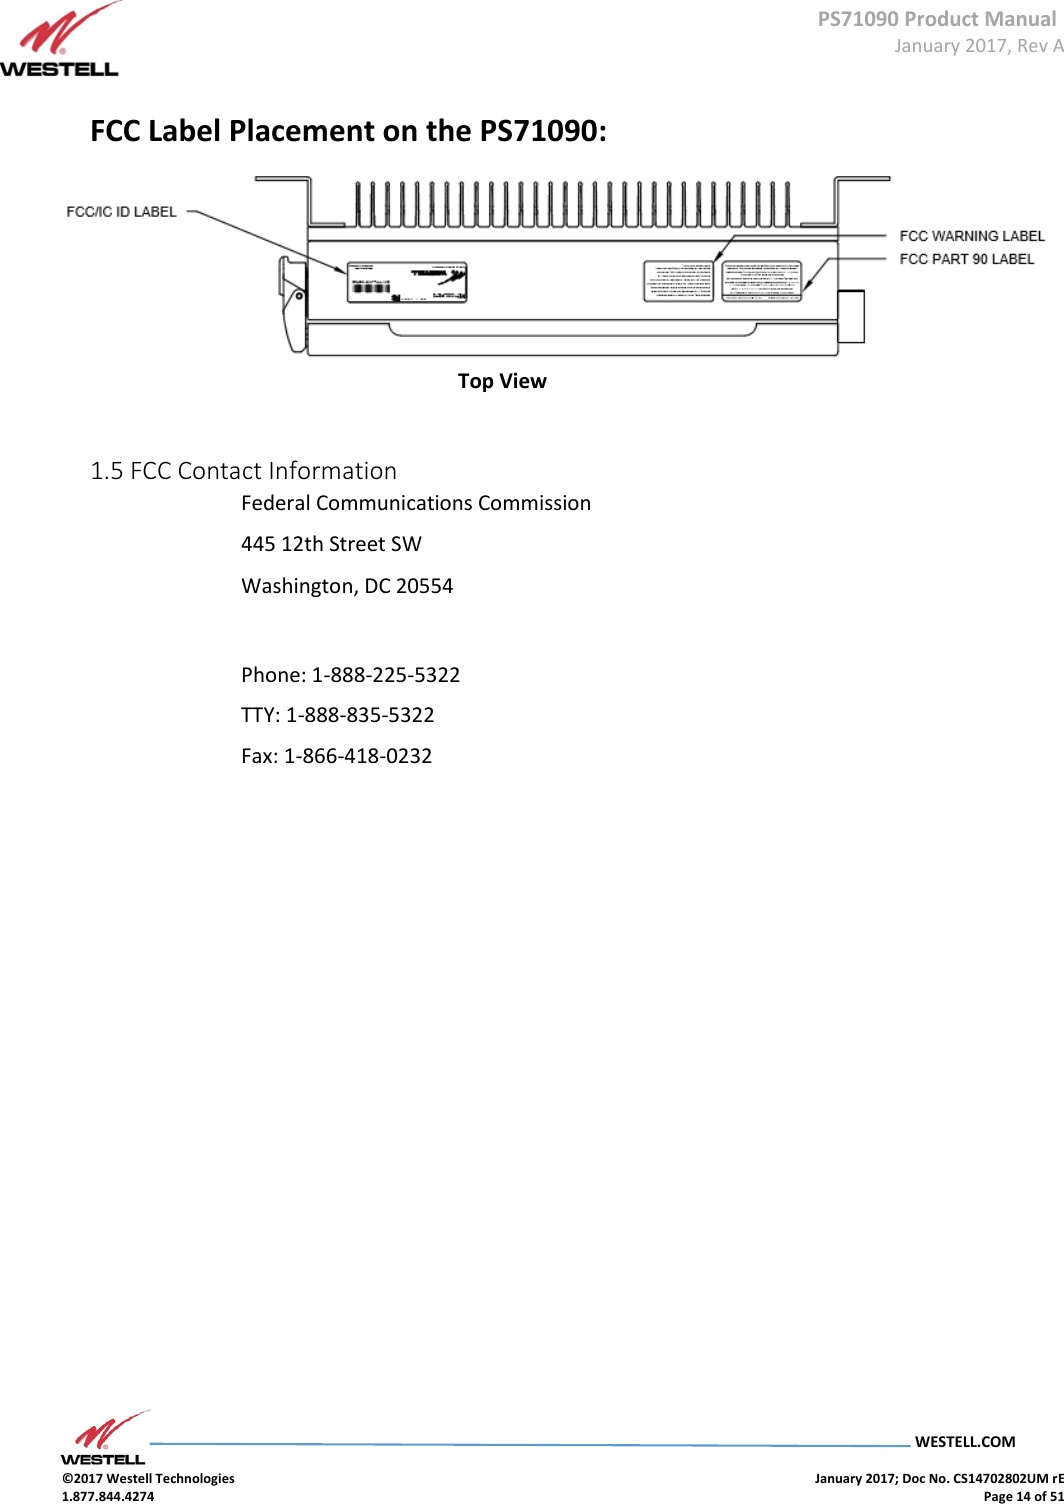 PS71090 Product Manual  January 2017, Rev A  WESTELL.COM  ©2017 Westell Technologies    January 2017; Doc No. CS14702802UM rE 1.877.844.4274    Page 14 of 51  FCC Label Placement on the PS71090: Top View  1.5 FCC Contact Information  Federal Communications Commission  445 12th Street SW  Washington, DC 20554    Phone: 1-888-225-5322  TTY: 1-888-835-5322  Fax: 1-866-418-0232                 